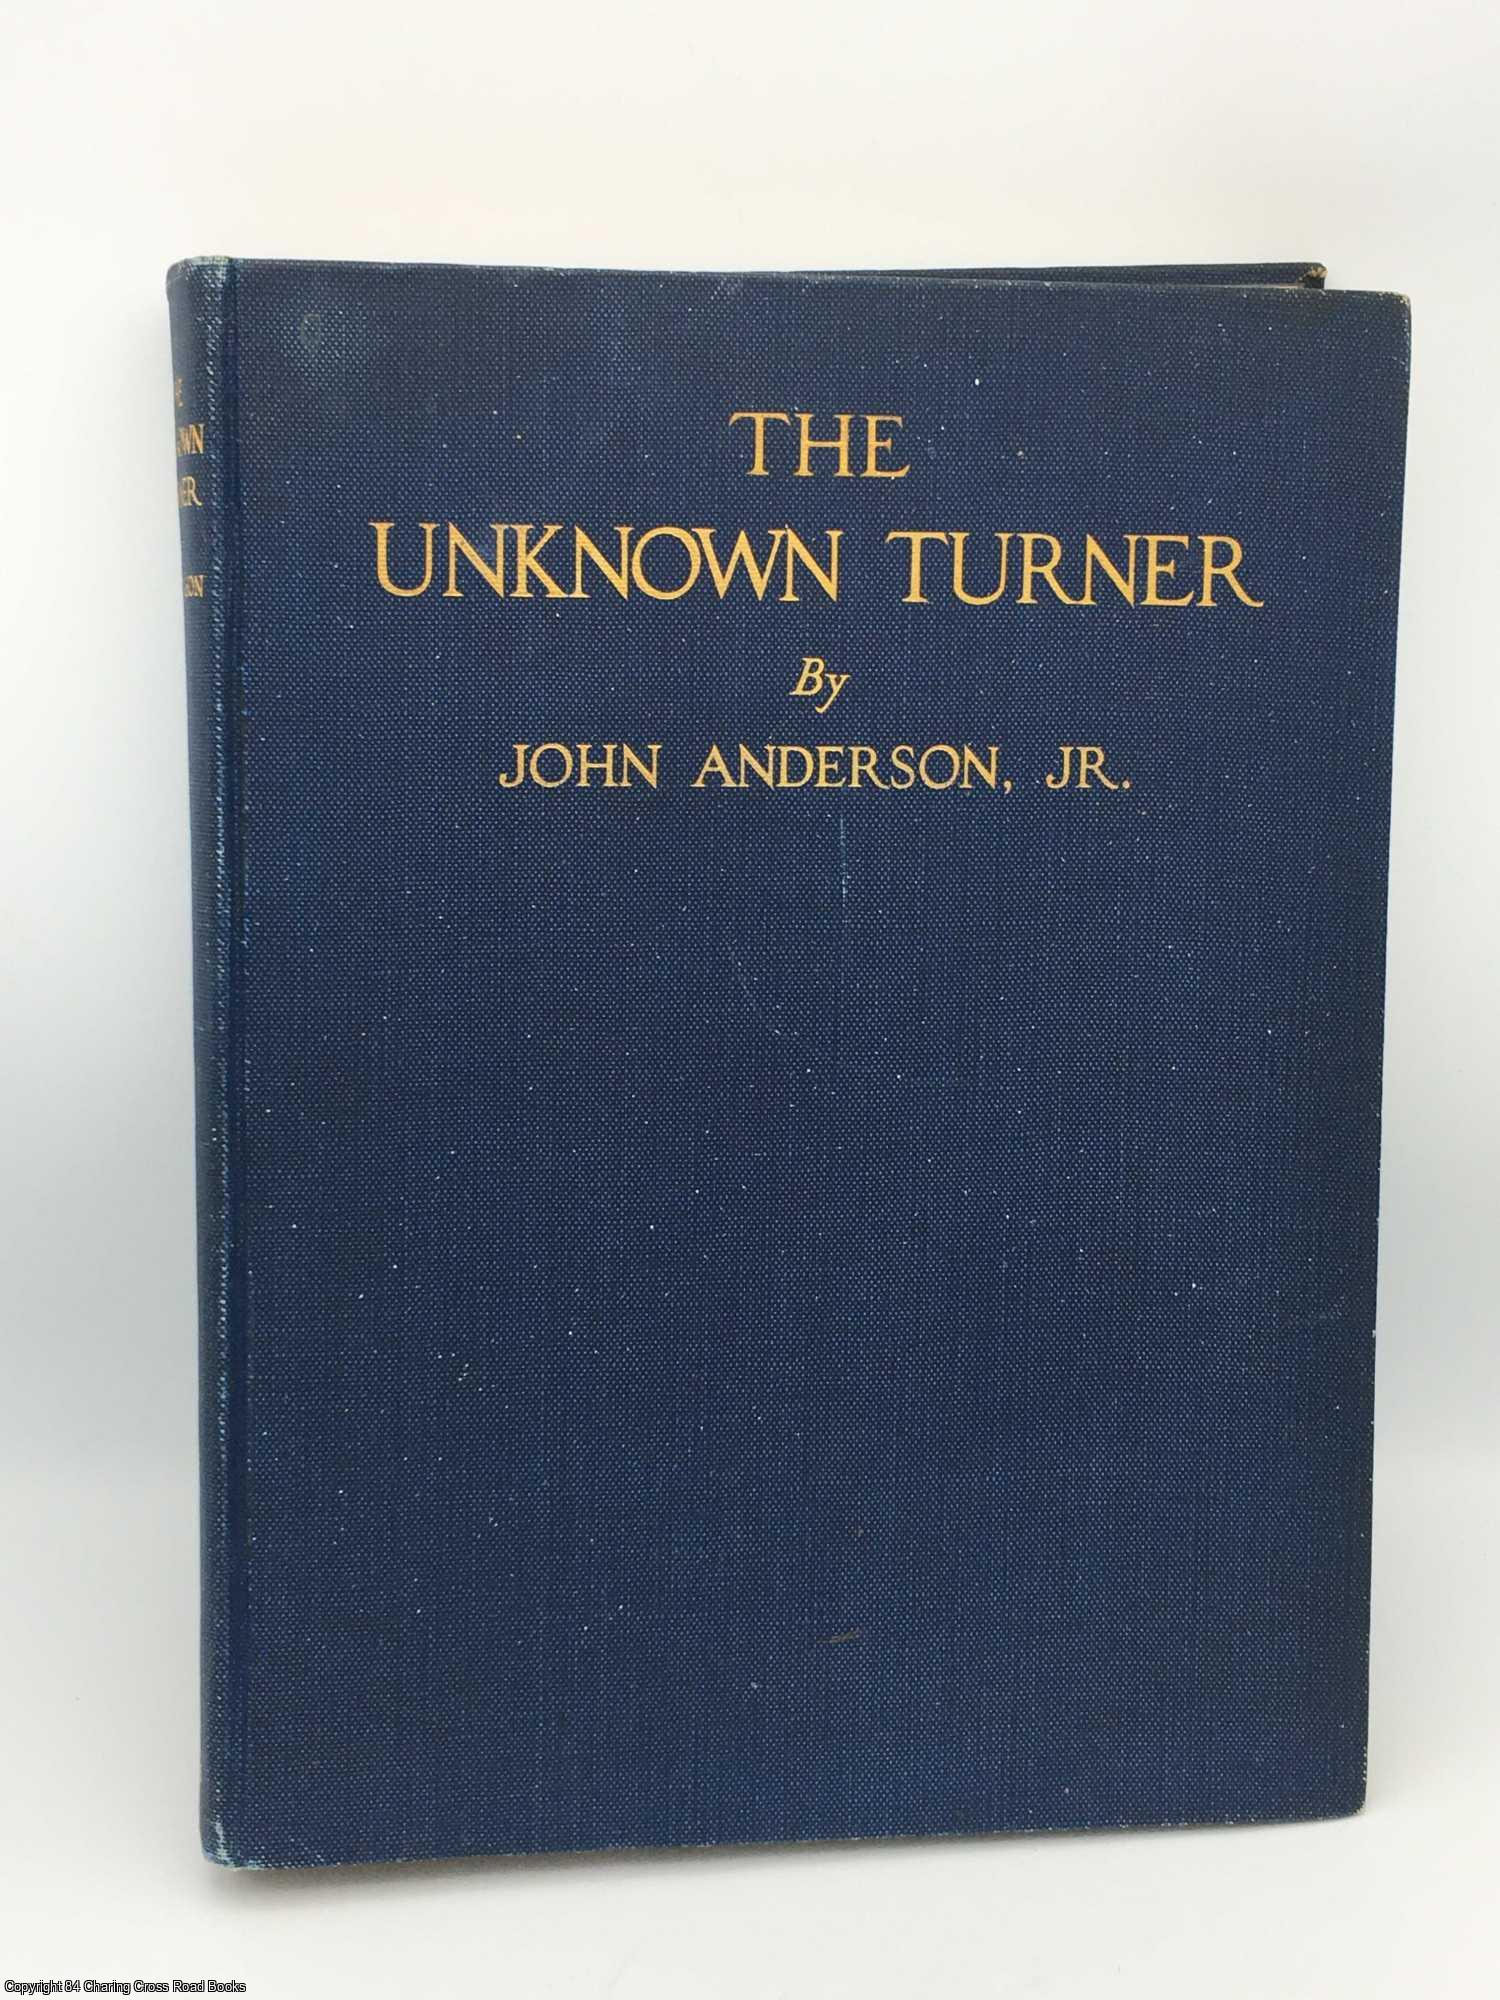 Anderson Jr, John - The Unknown Turner